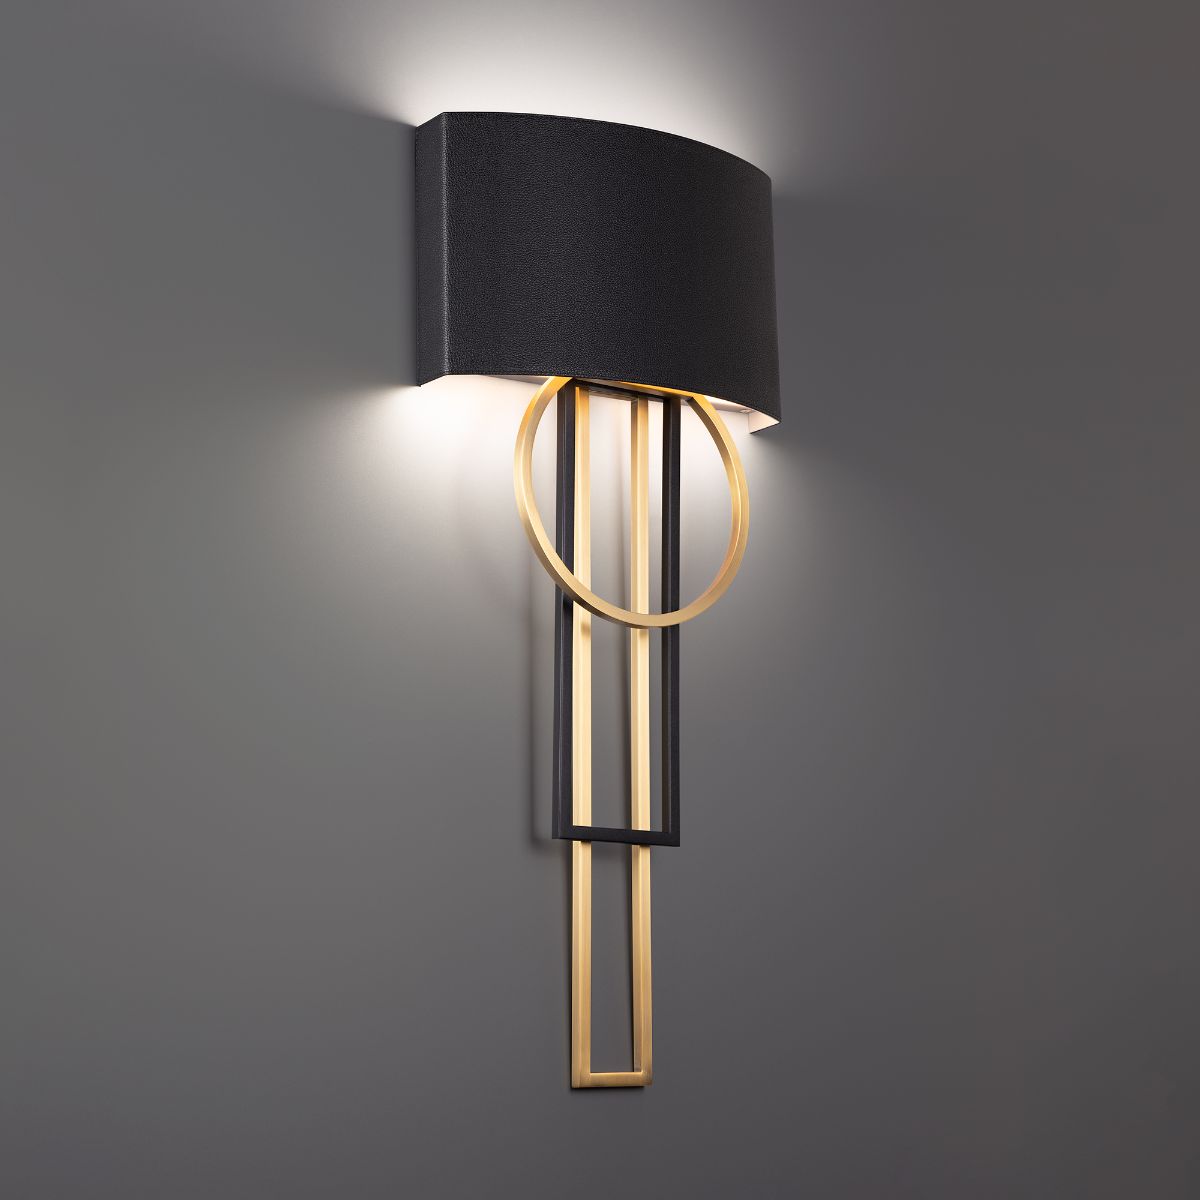 Sartre 32 in. LED Wall Sconce Brass finish